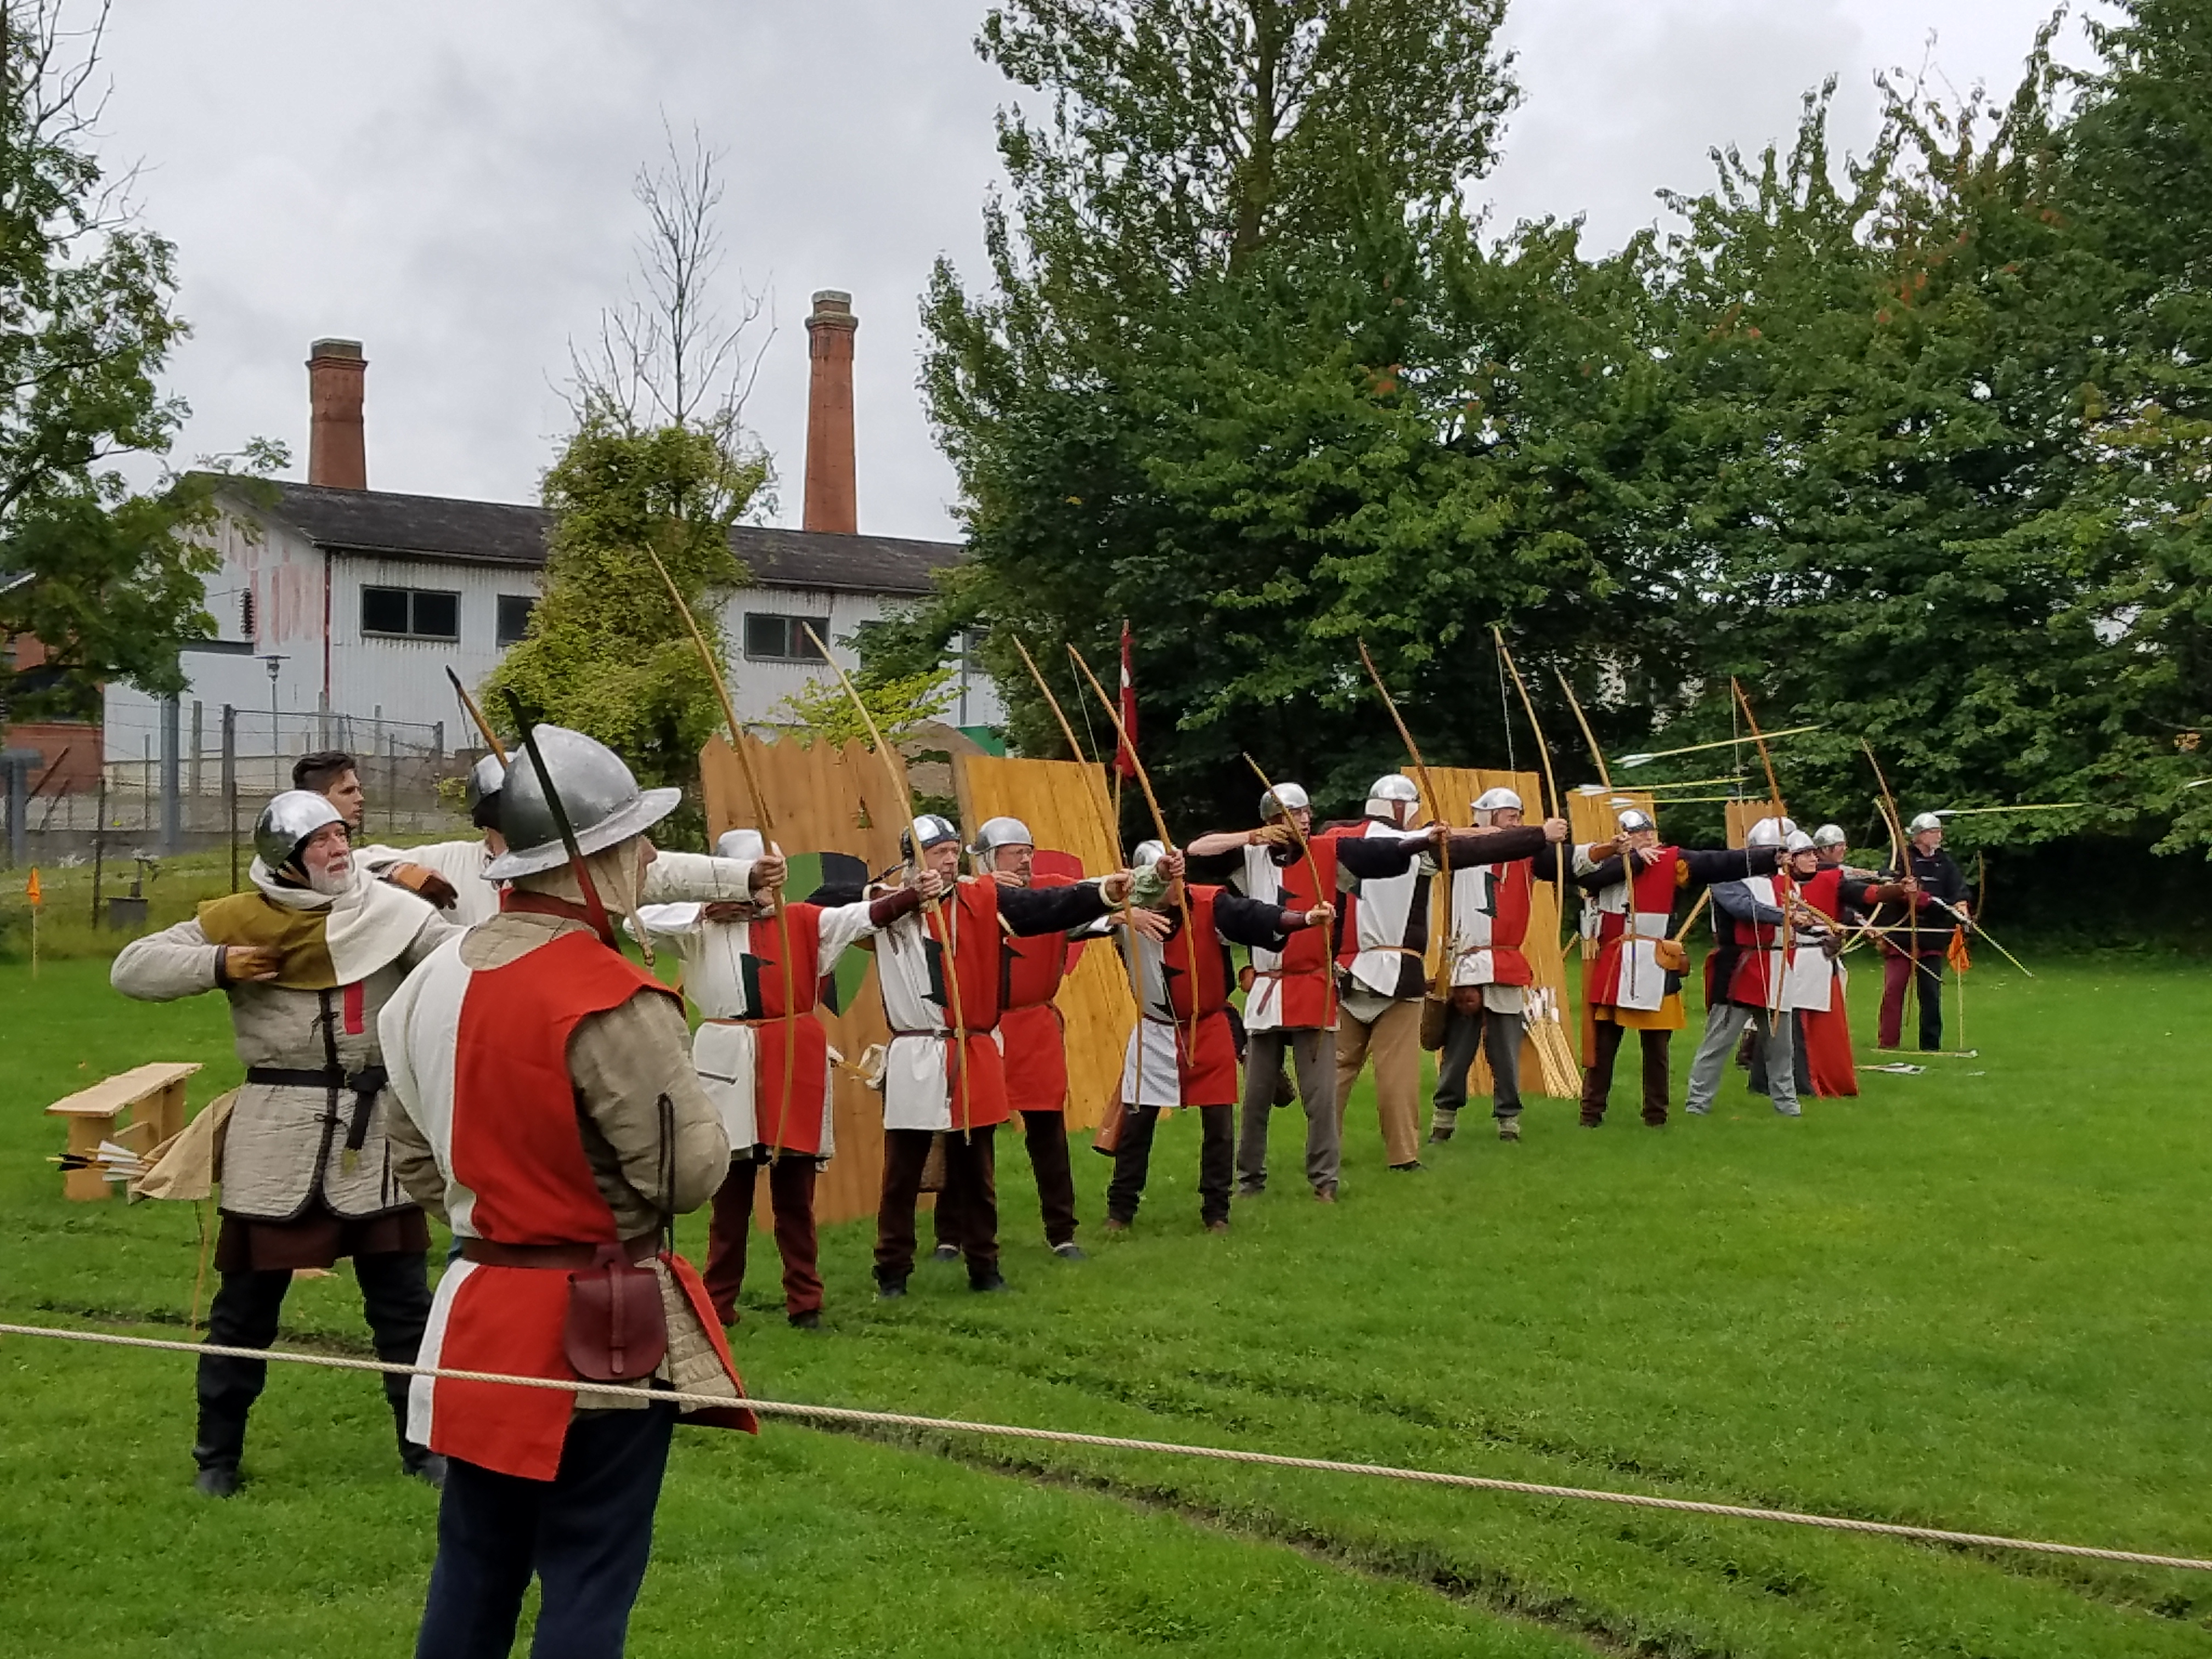 Nyborg medieval weekend with archers